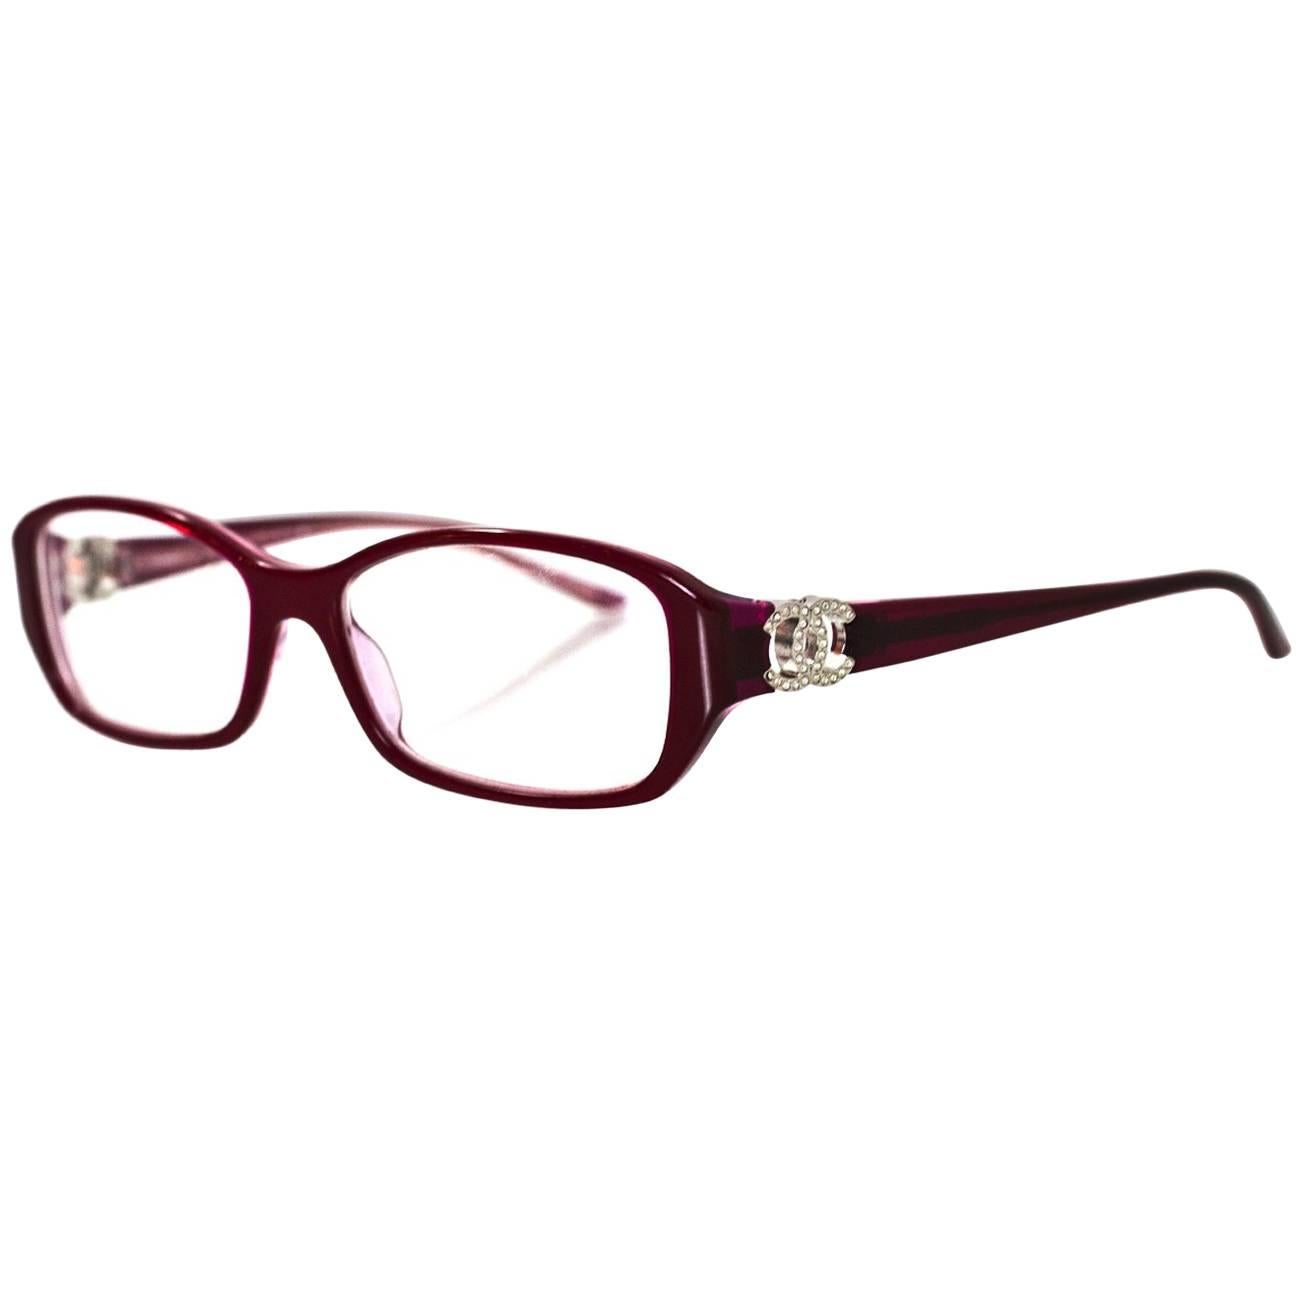 Chanel Red with Crystal CC Prescription Eyeglasses with Case